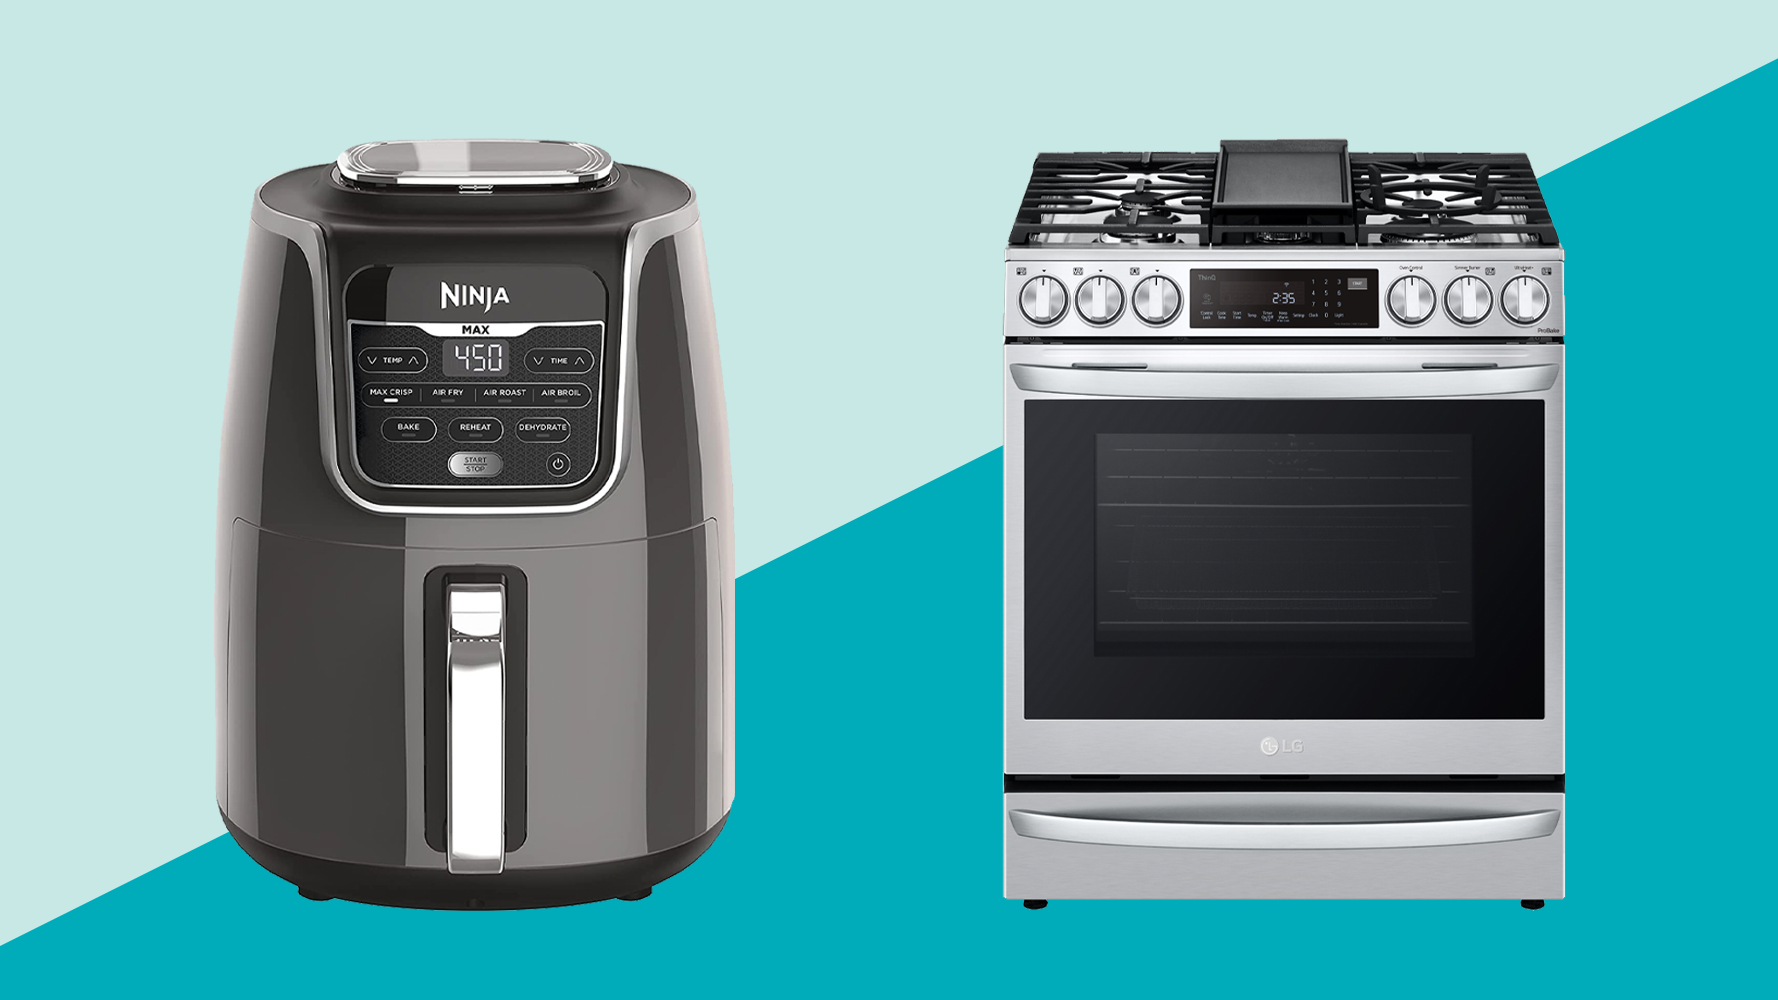 https://hips.hearstapps.com/hmg-prod/images/gh-air-fryer-vs-convection-1675378399.png?crop=0.888888888888889xw:1xh;center,top